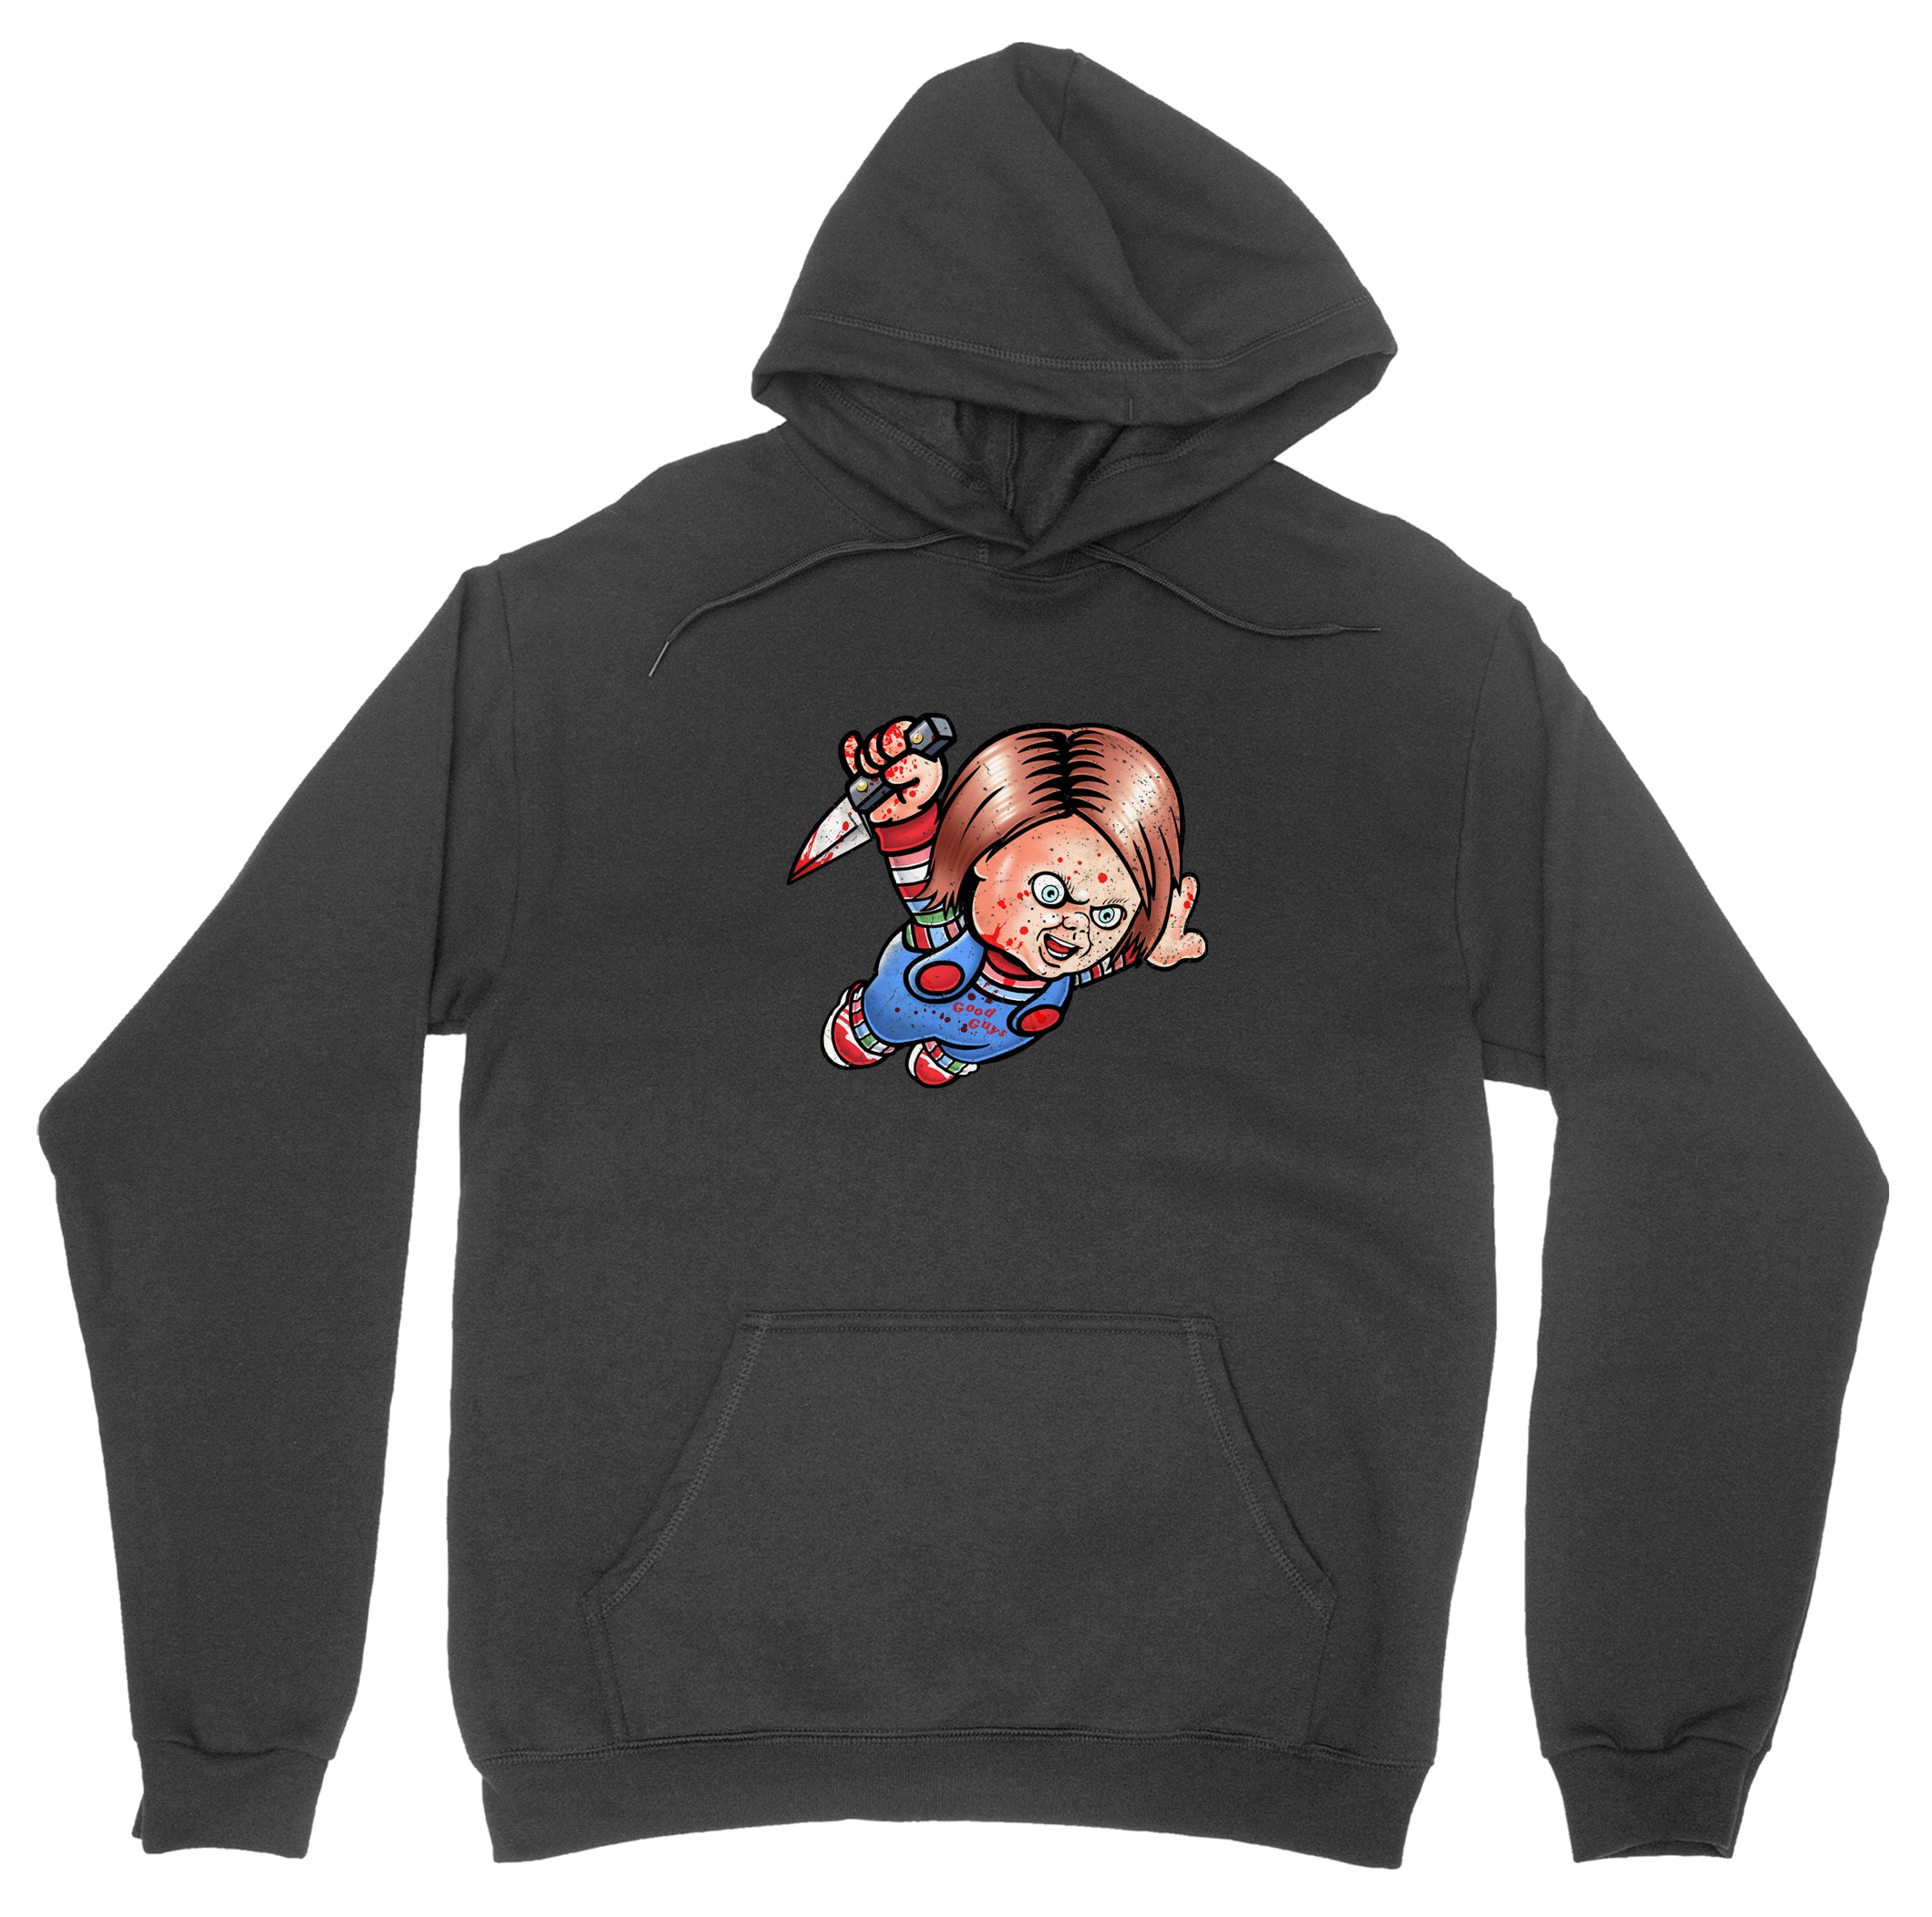 childs play hoodie